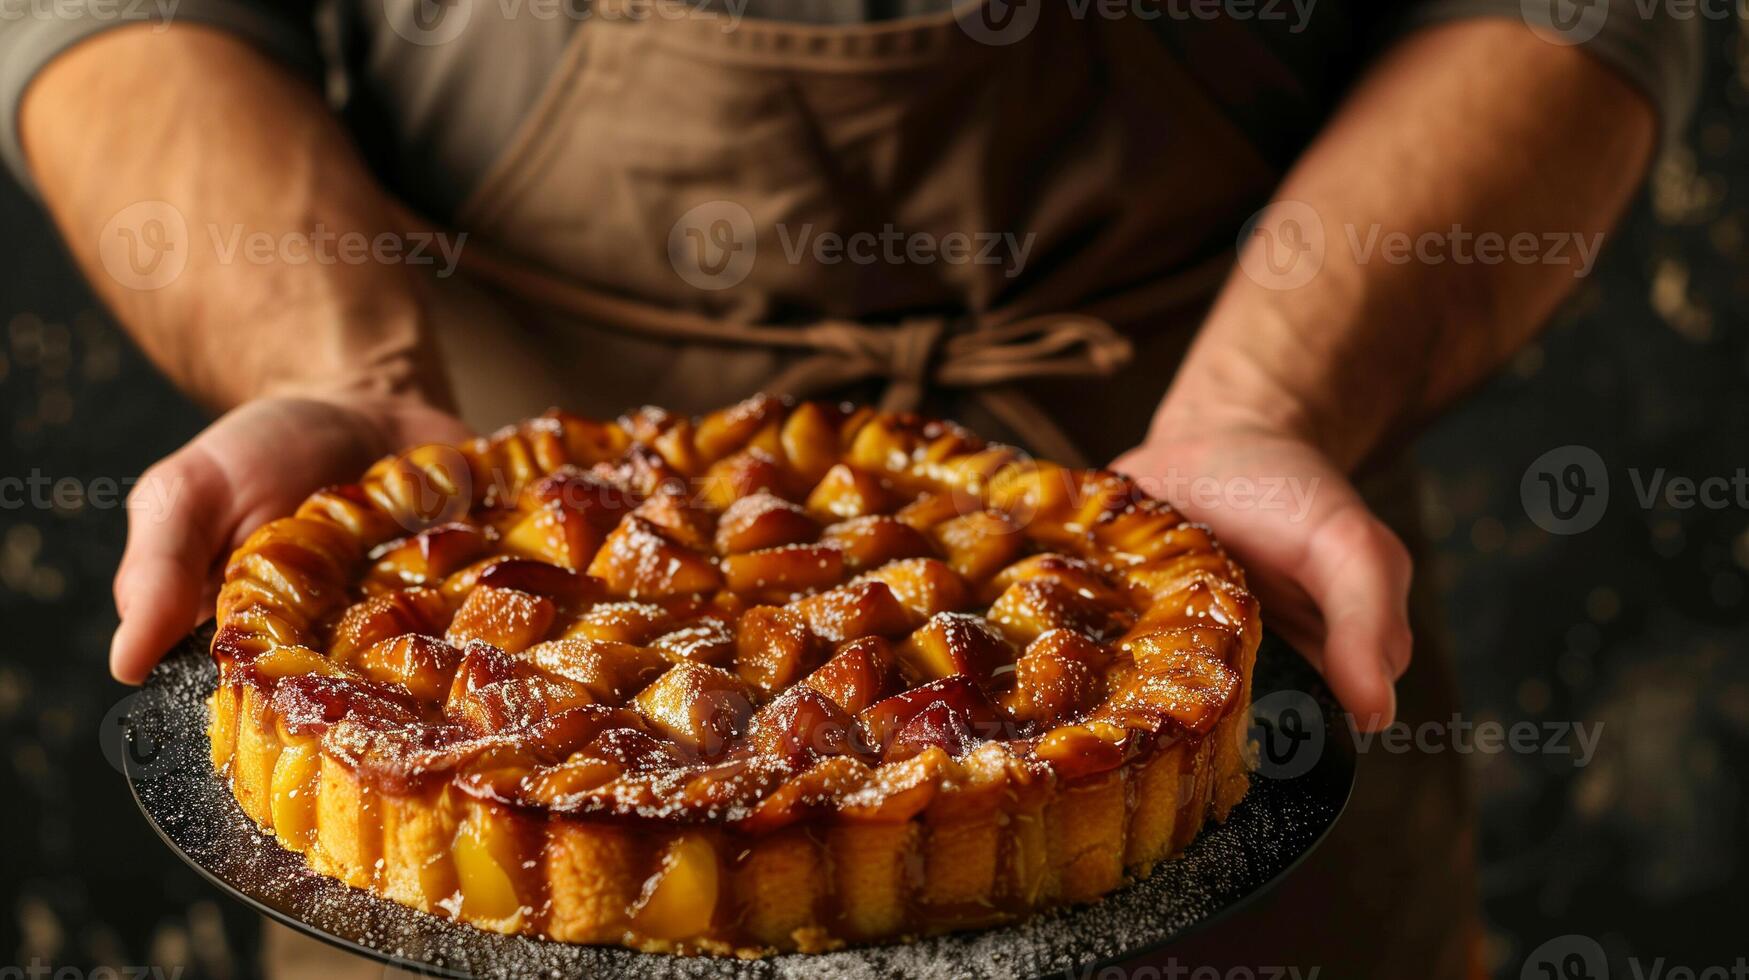 A person presents a homemade caramelized apple tart on a dark background, ideal for Thanksgiving and autumnal celebrations, evoking cozy culinary traditions photo